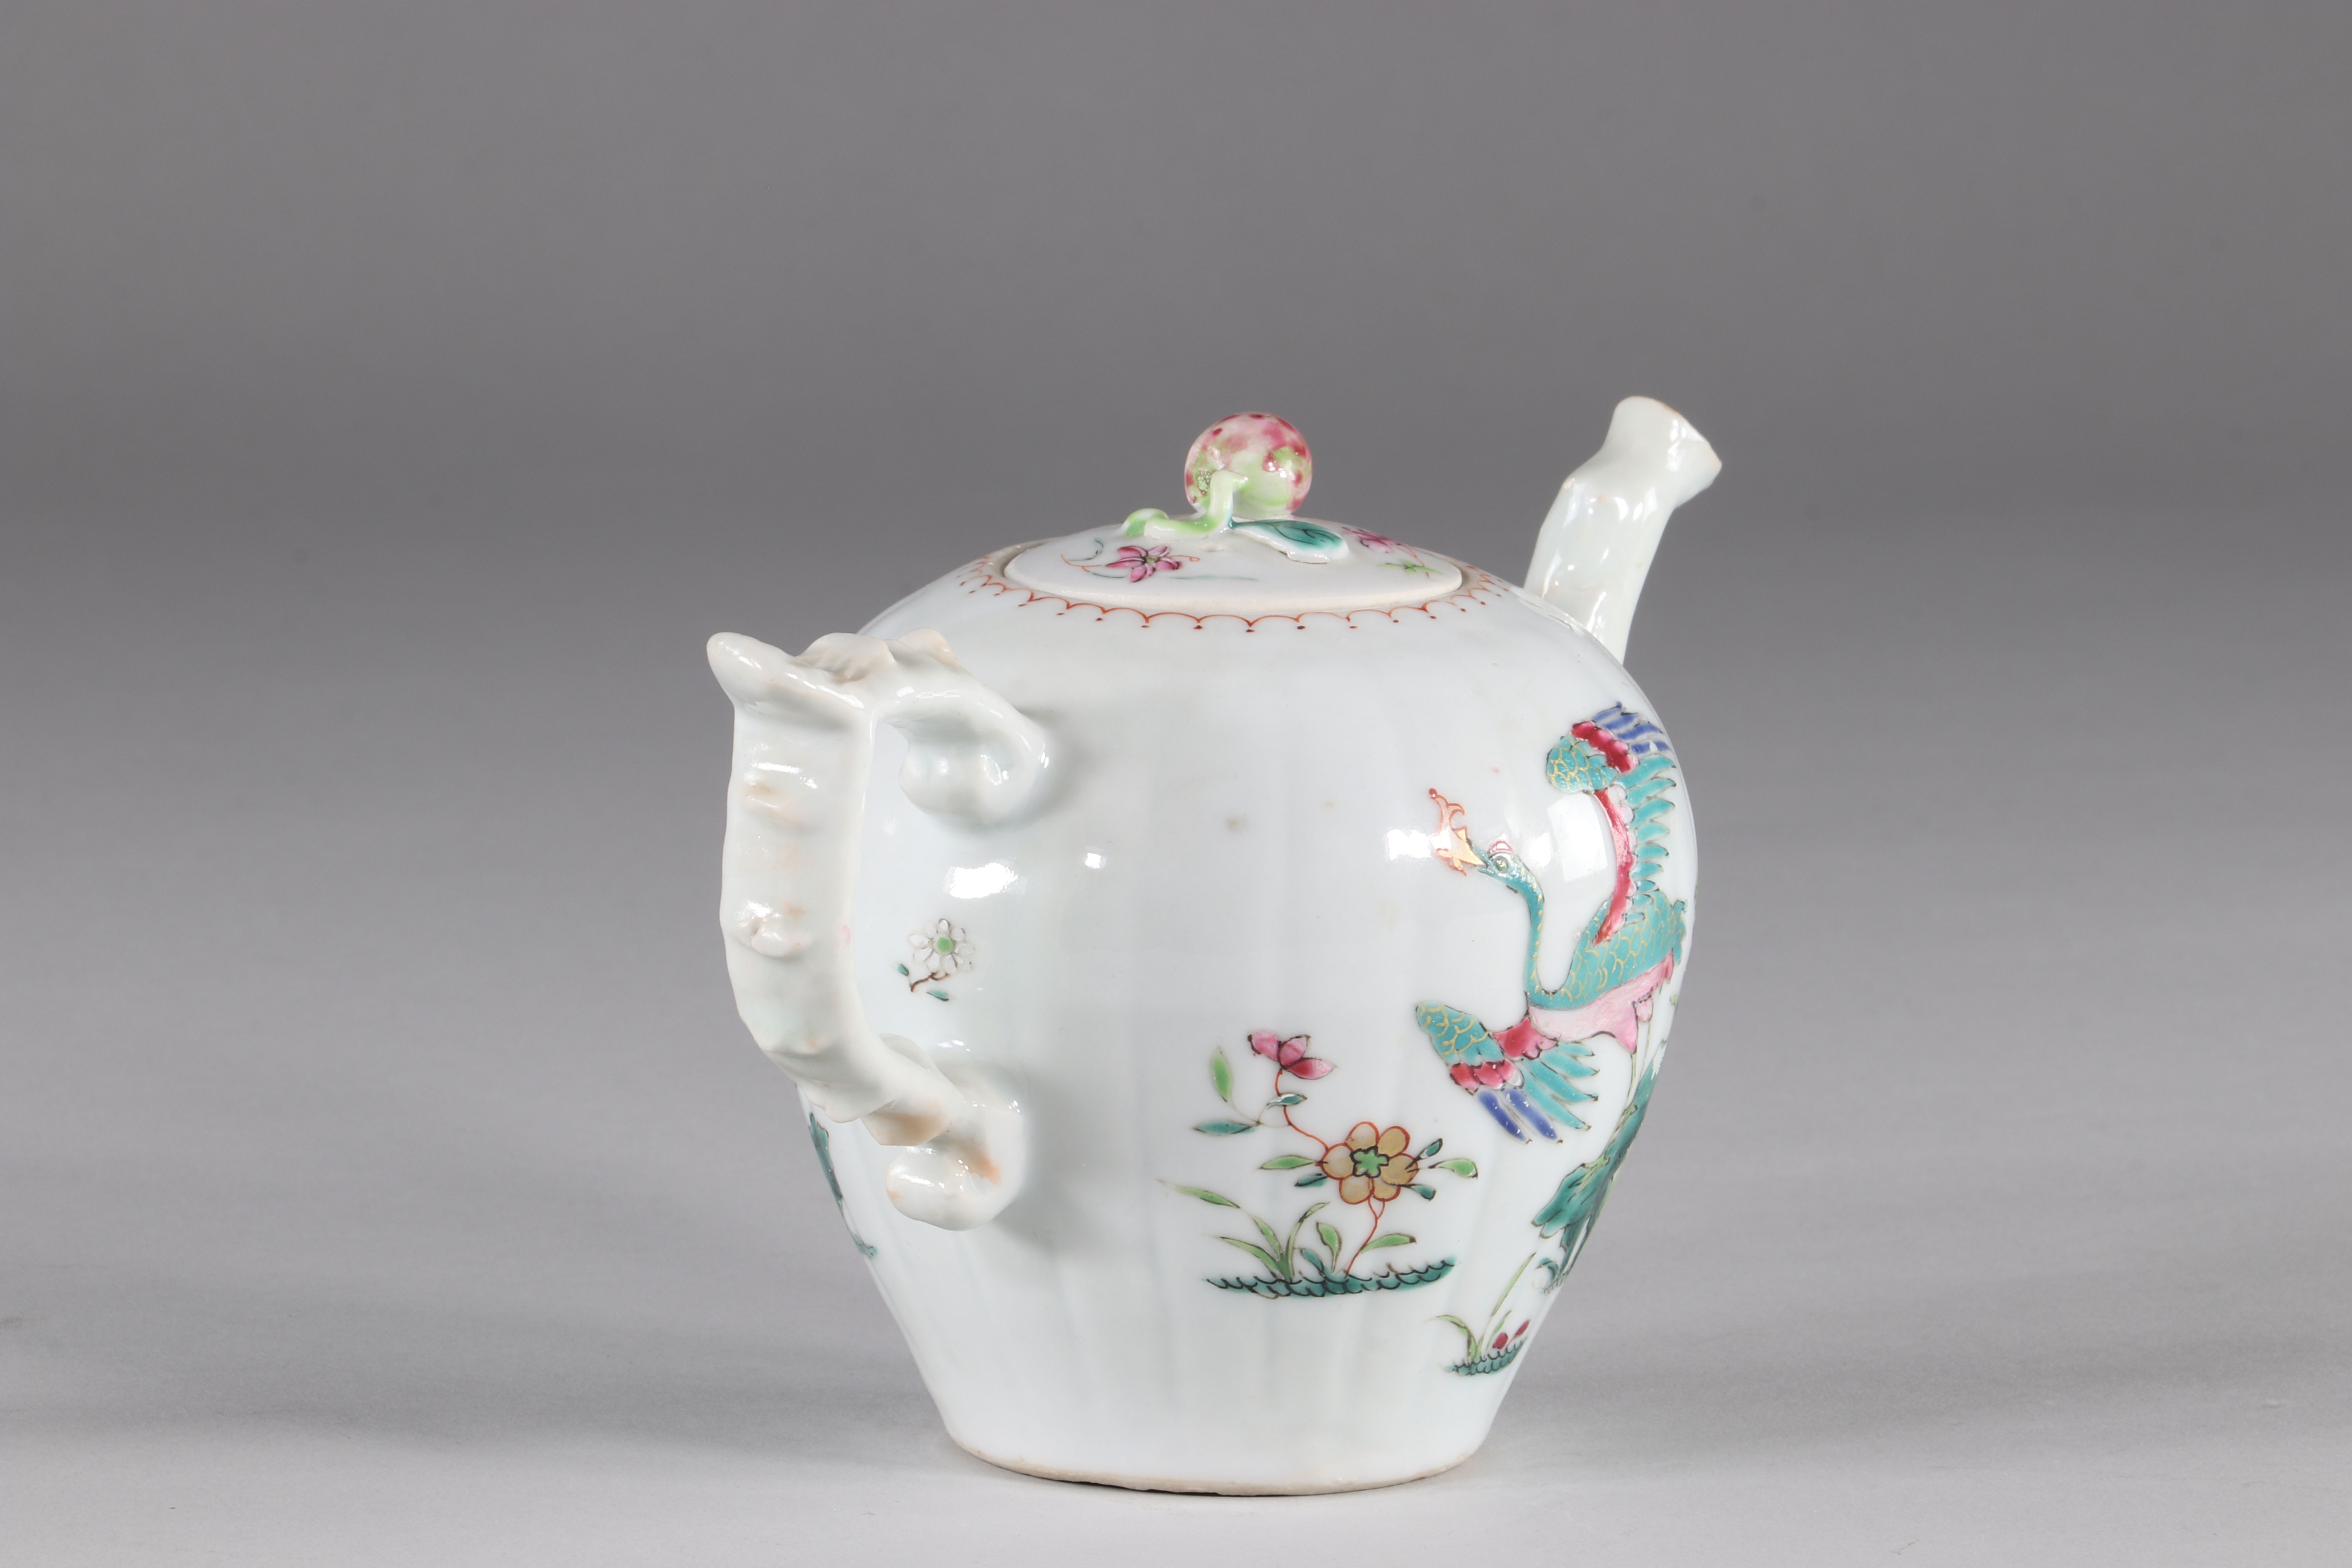 Famille rose teapot decorated with birds, China XVIII Qianlong period. Compagnie des Indes. - Image 4 of 6